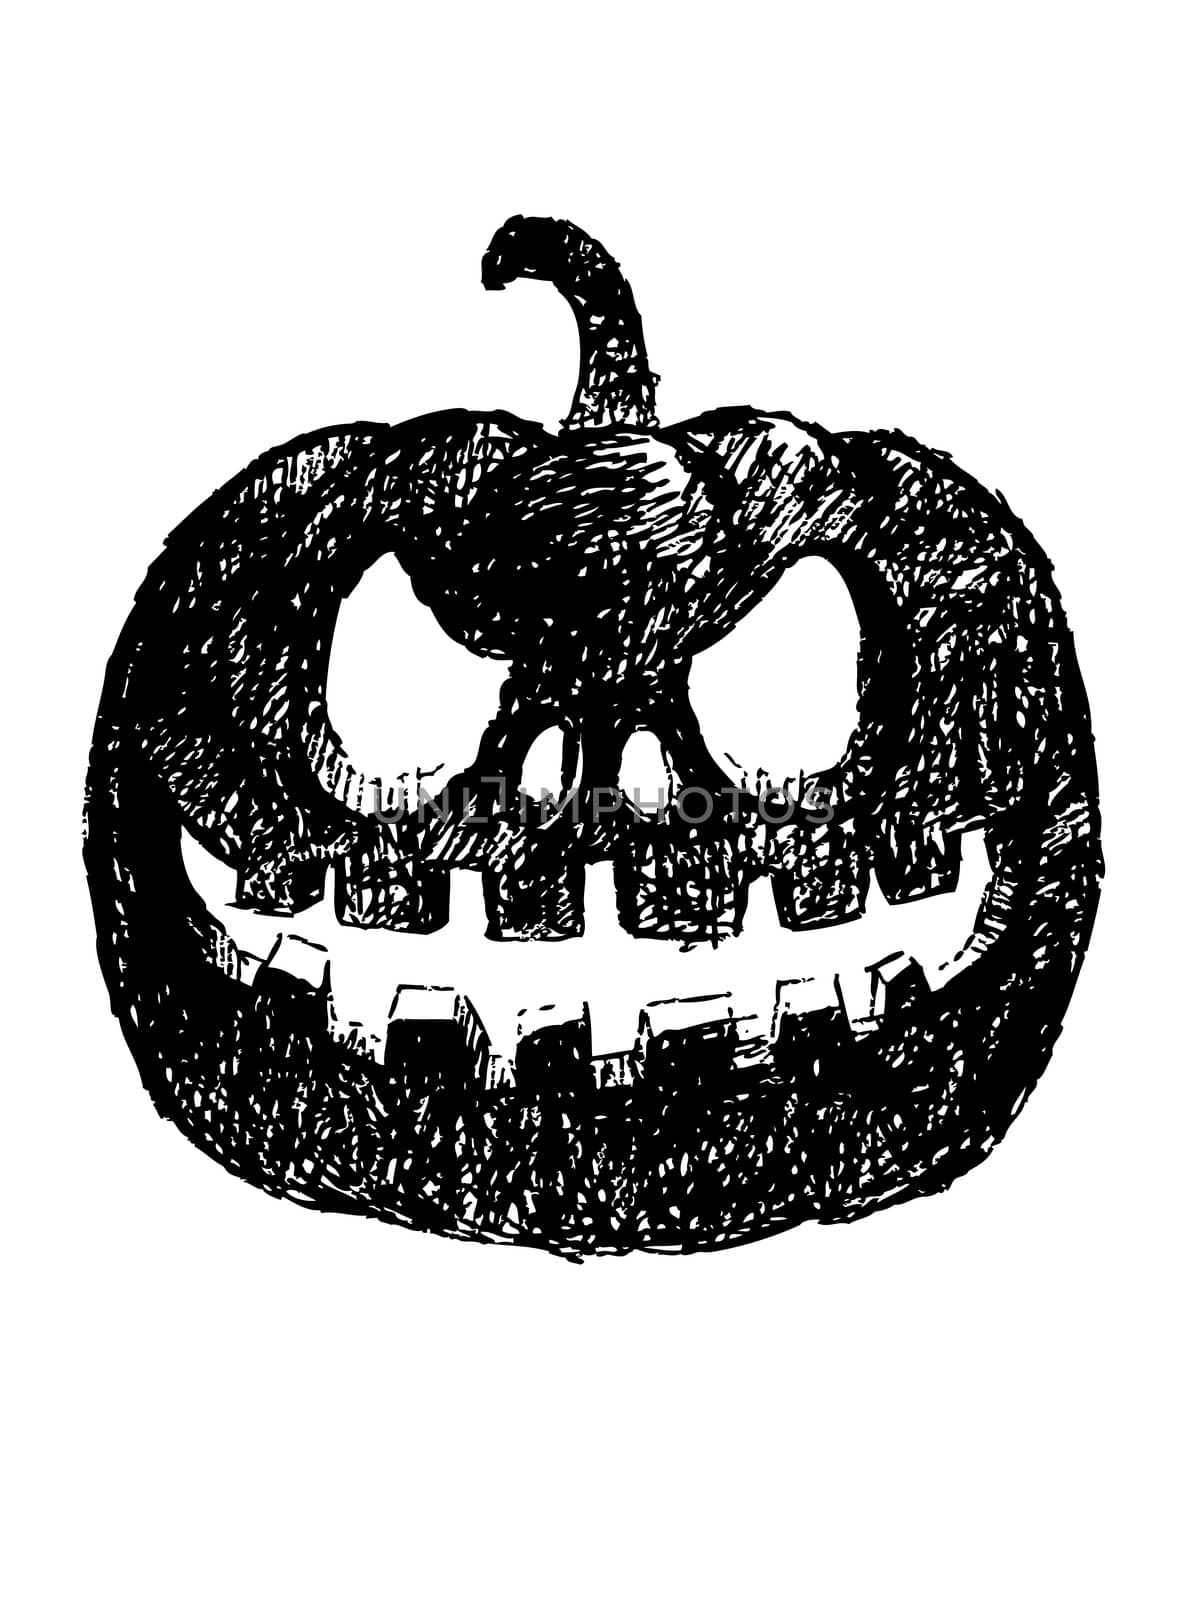 hand draw carving pumpkin by pencil , design for Halloween day